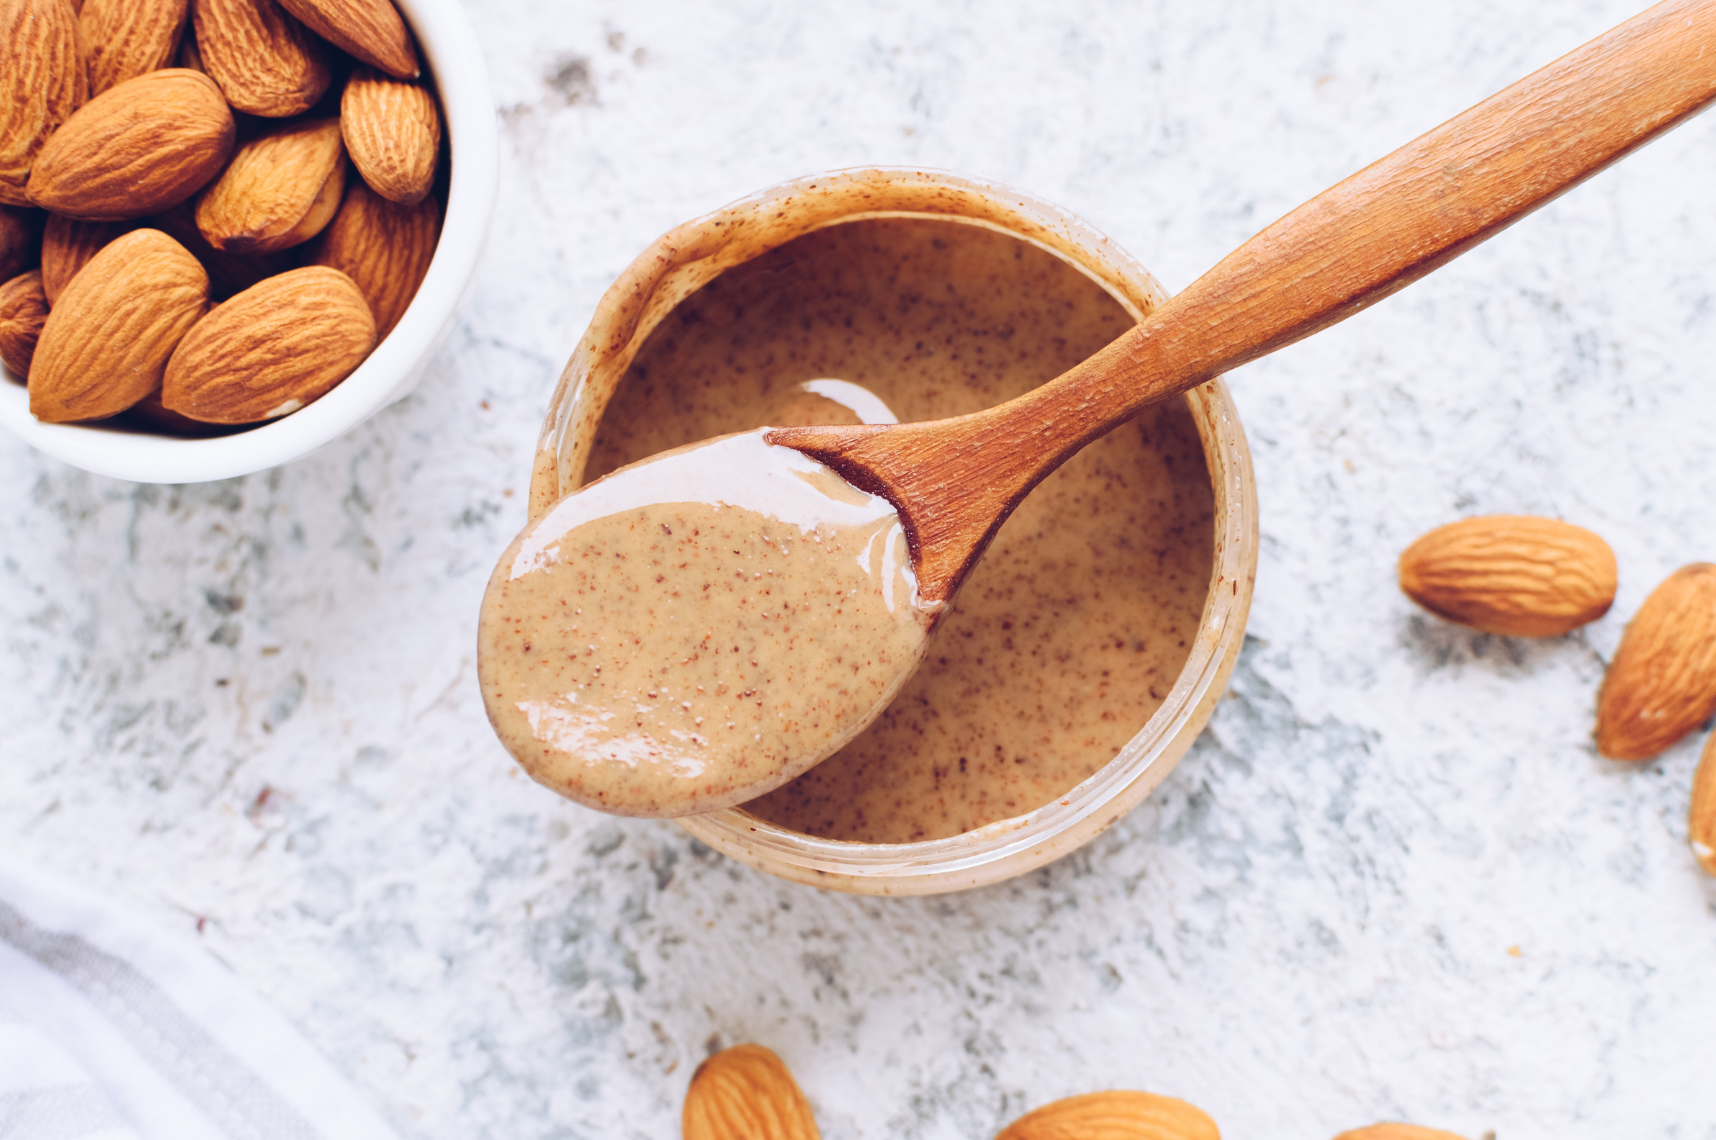 8 Plant-Based Sources of Protein to Add to Your Diet